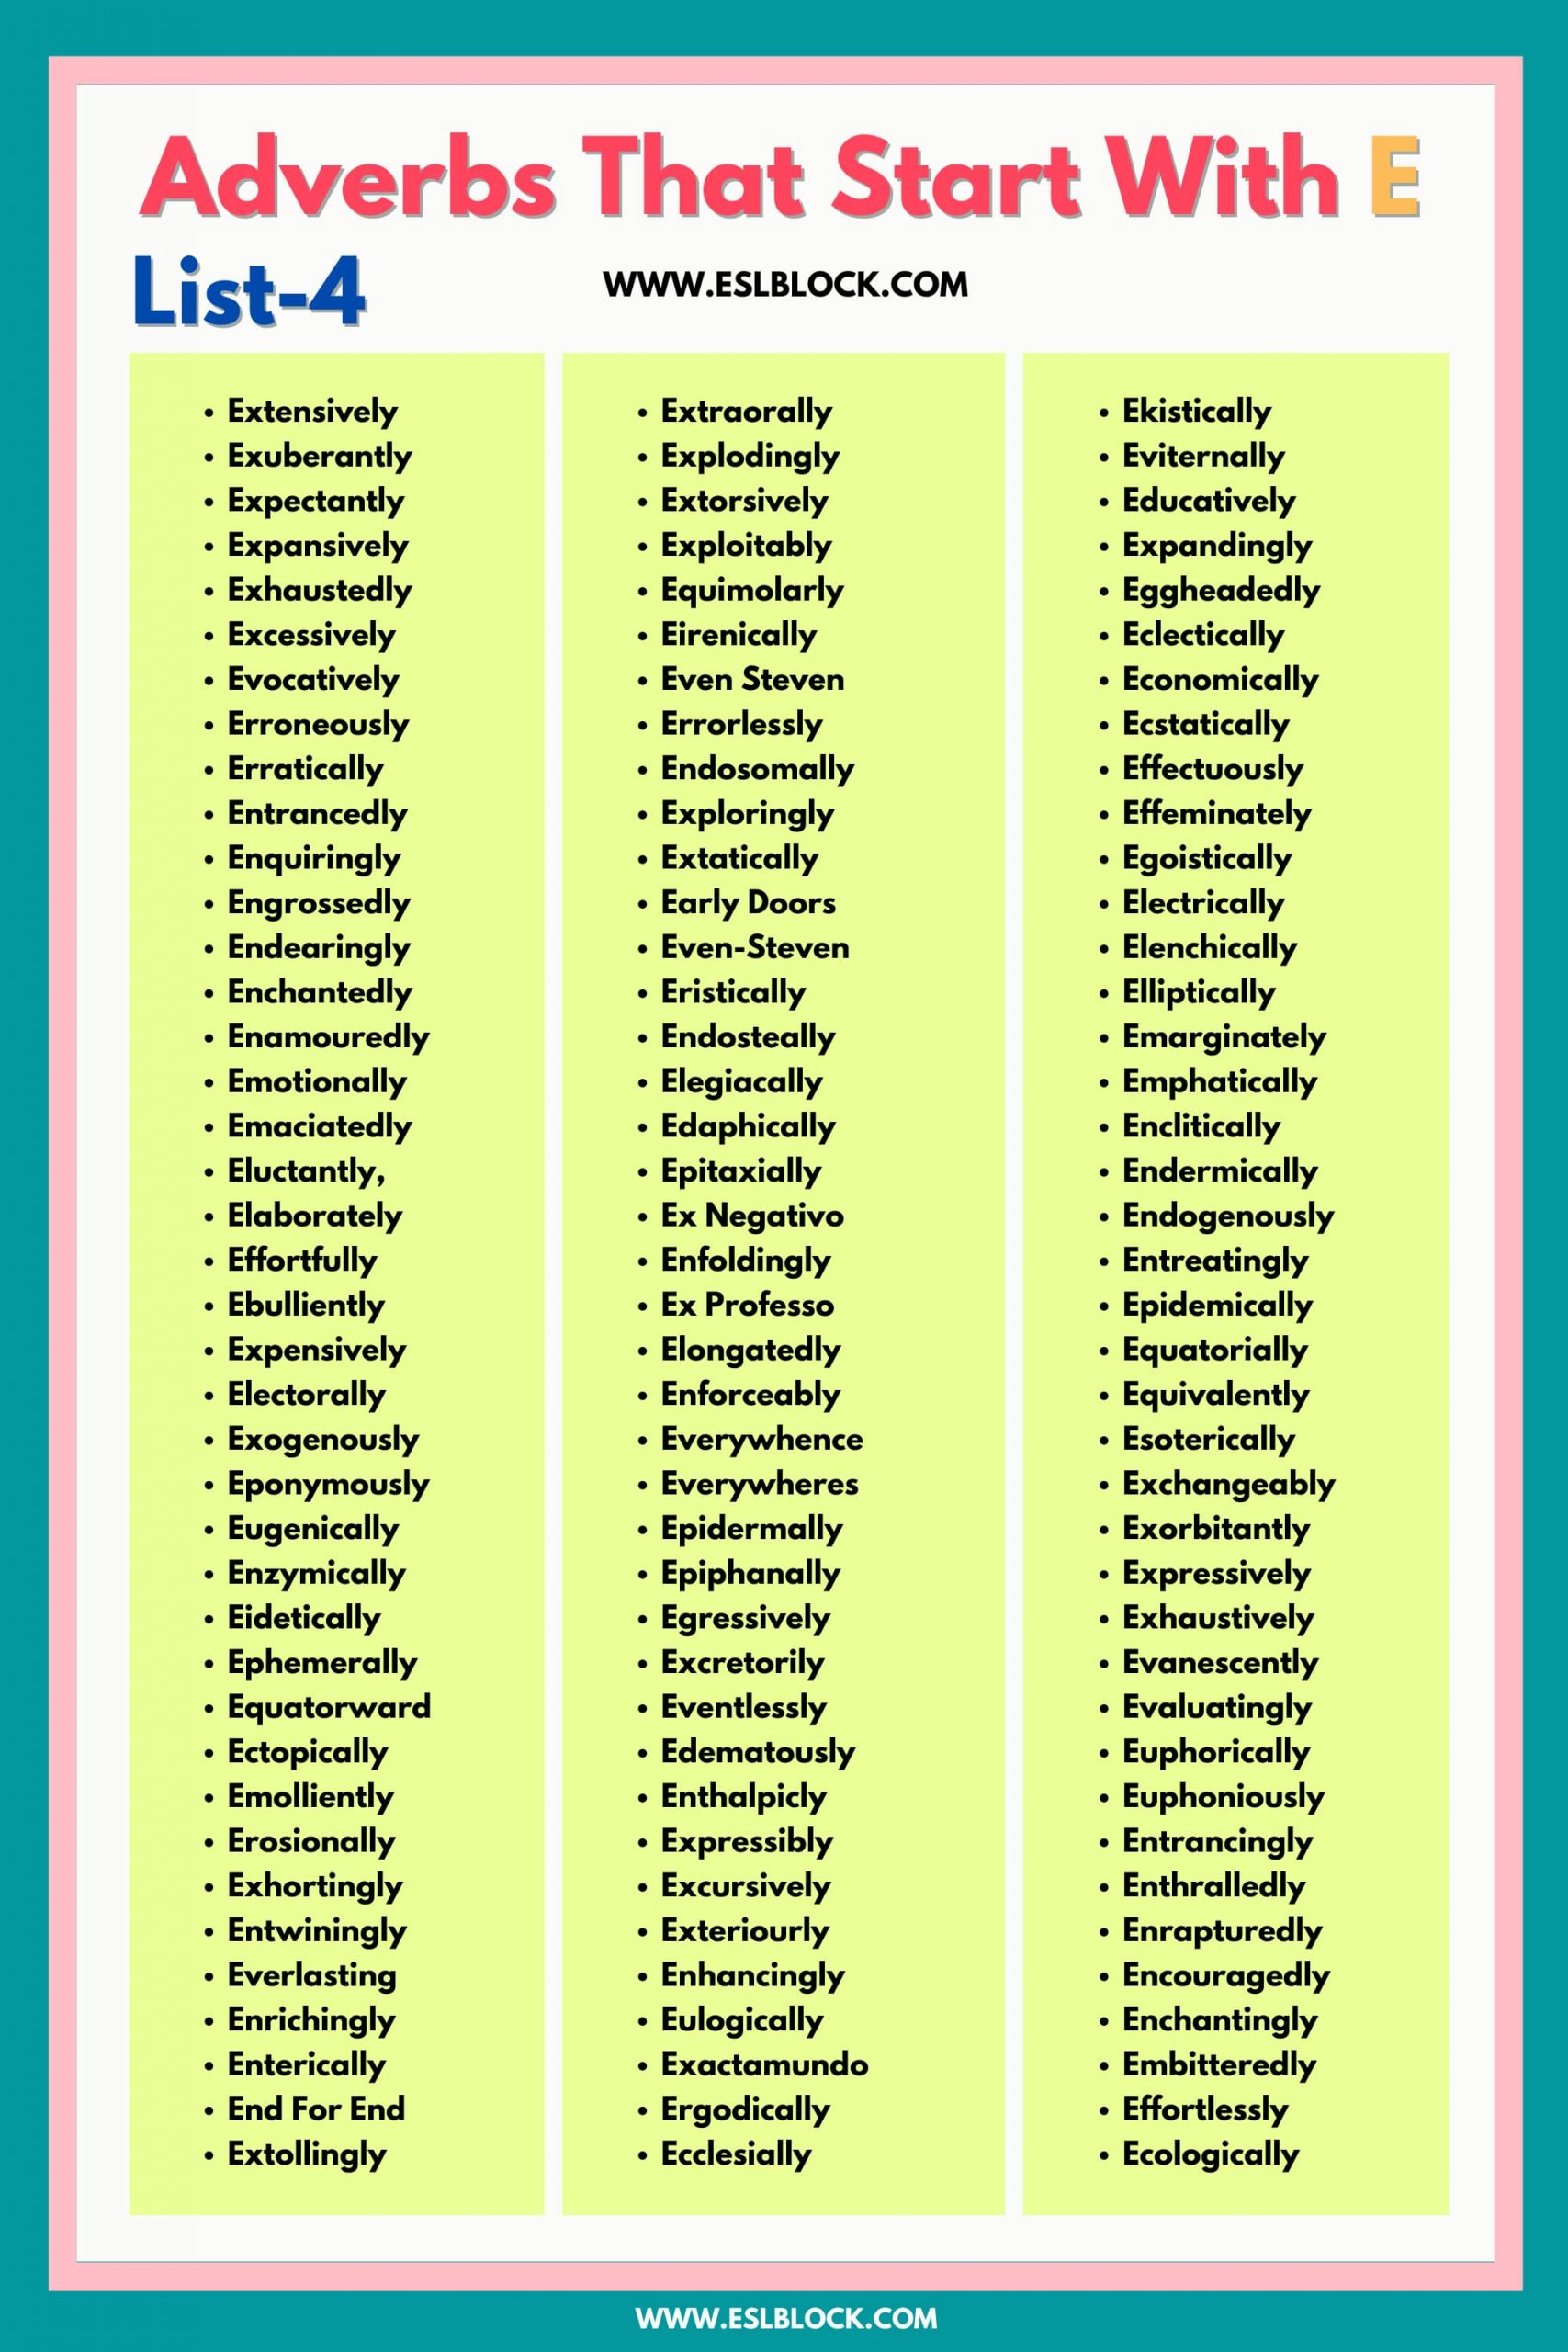 100 Example Sentences Using Adverbs, 4 Letter Adverbs That Start with E, 4 Letter Words, 5 Letter Adverbs That Start with E, 5 Letter Words, 6 Letter Adverbs That Start with E, 6 Letter Words, A to Z Adverbs, AA Adverbs, Adverb vocabulary words, Adverbs, Adverbs That Start with E, Adverbs with Example Sentences, All Adverbs, Types of Adverbs, Types of Adverbs with Example Sentences, Vocabulary, What are Adverbs, What are the types of Adverbs, Words That with E